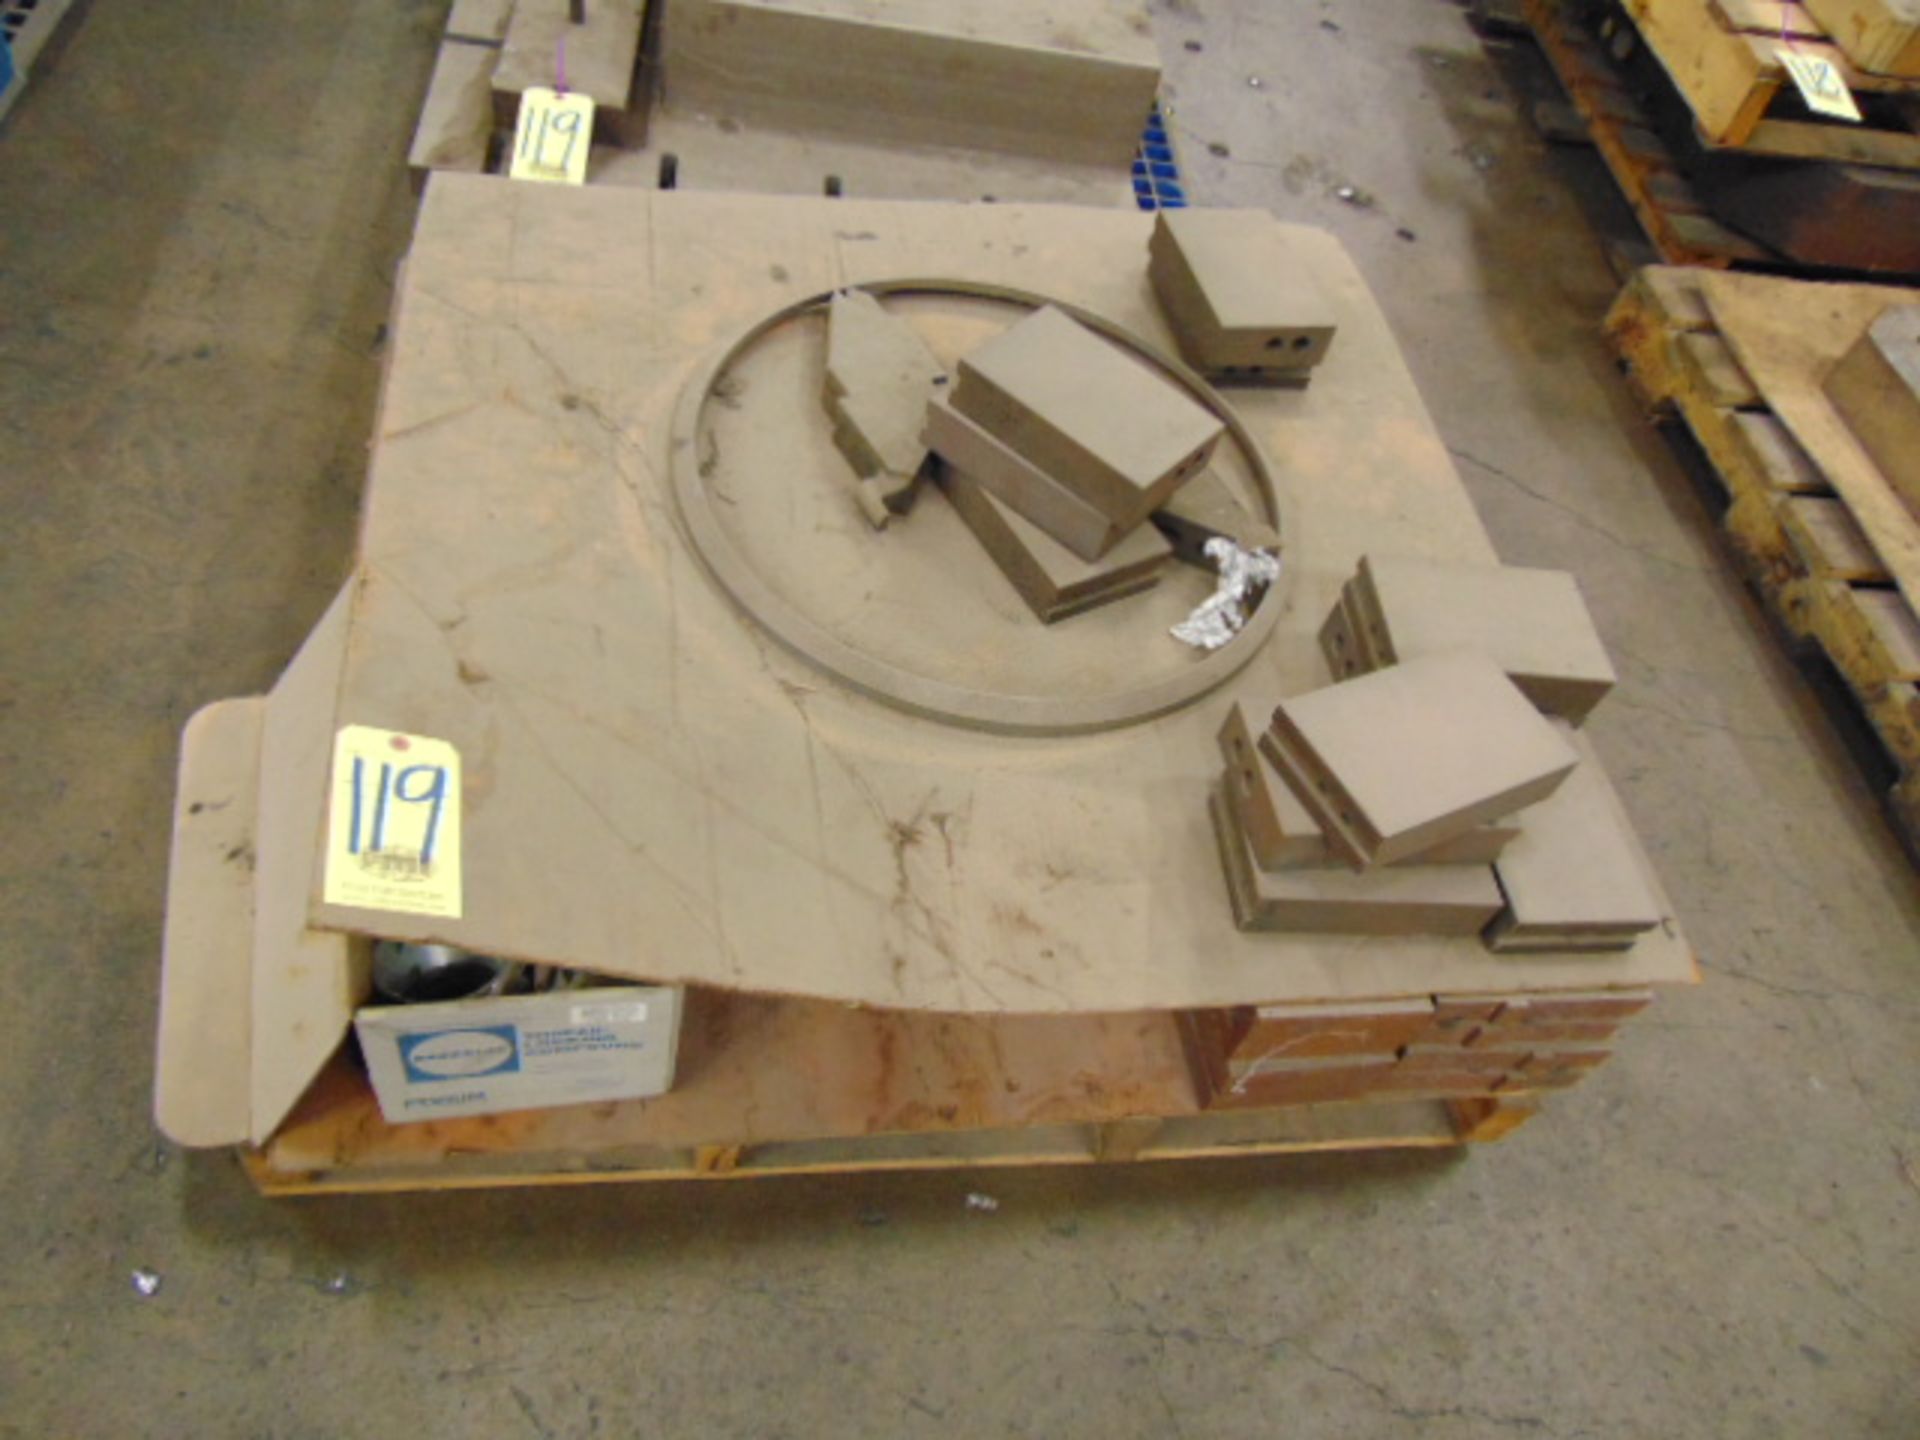 LOT CONSISTING OF: fixtures & chuck jaws, assorted (on six pallets) - Image 6 of 6